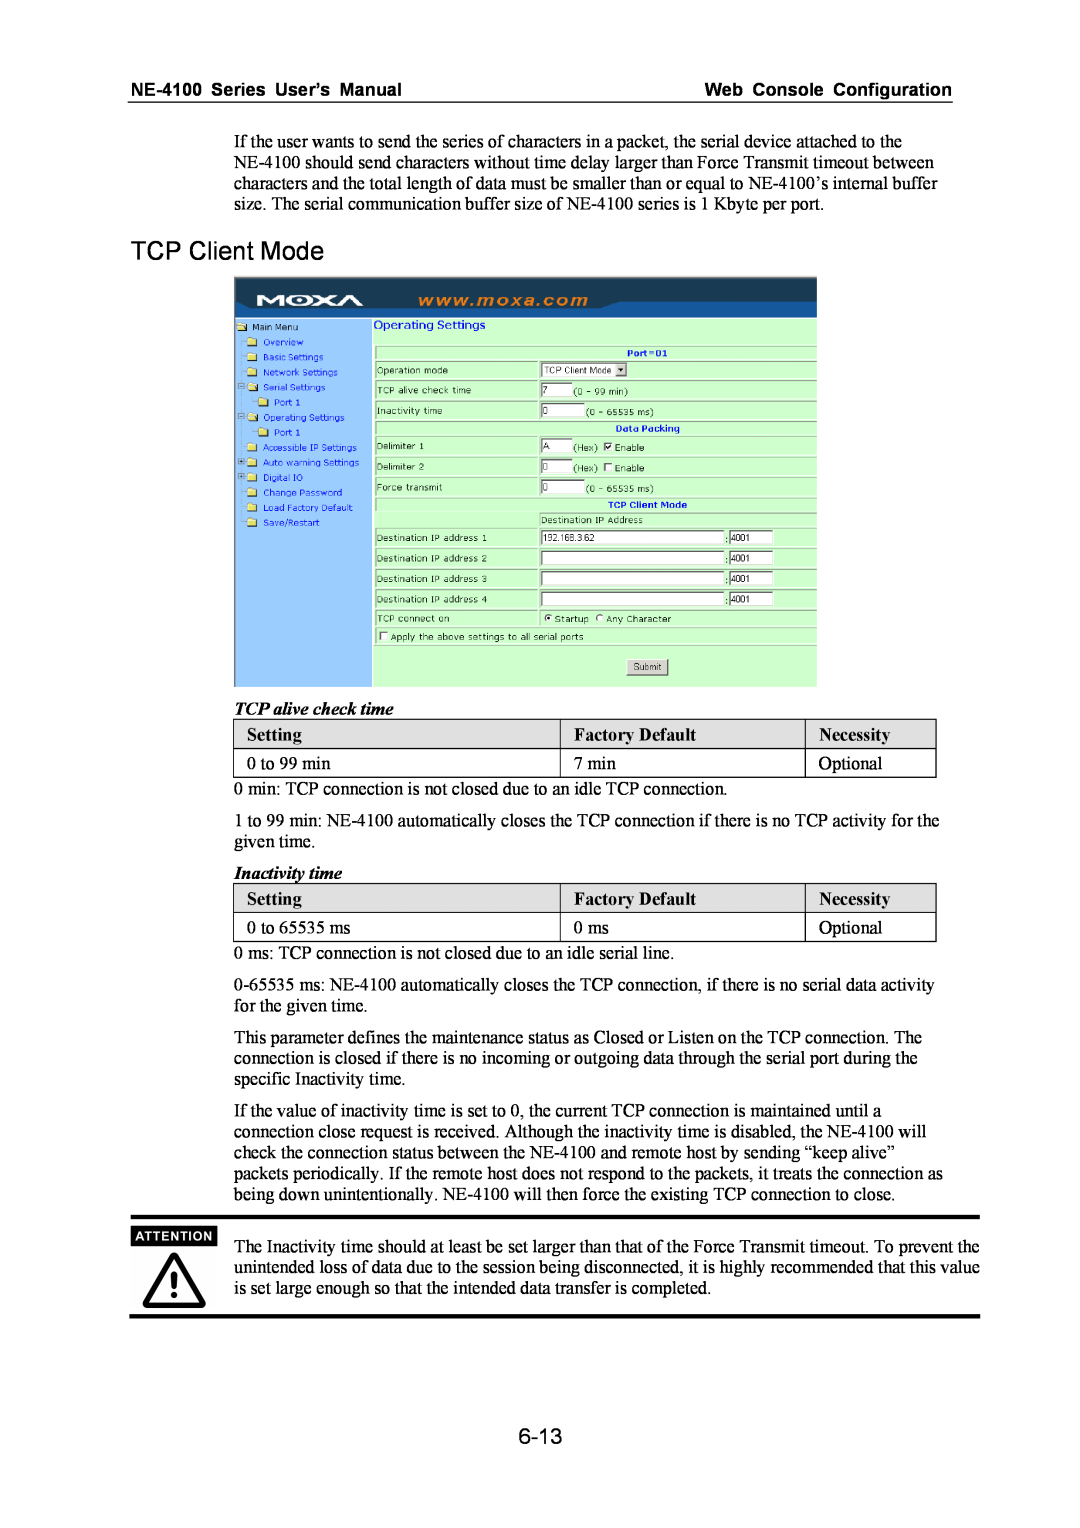 Moxa Technologies TCP Client Mode, 6-13, NE-4100 Series User’s Manual, Web Console Configuration, TCP alive check time 